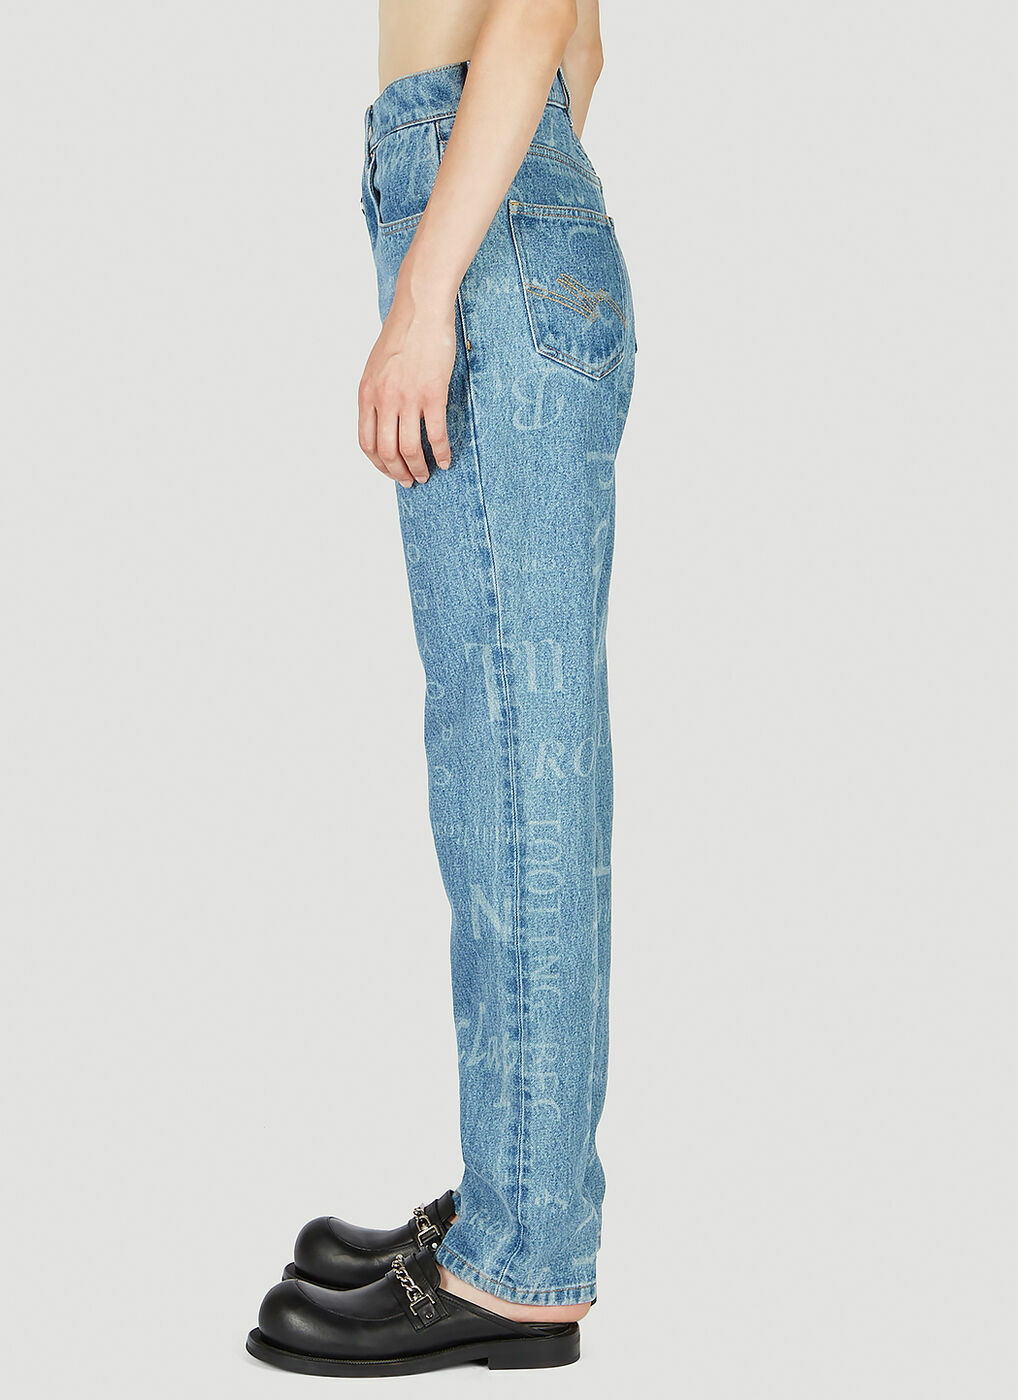 Martine Rose - Laser Print Straight Cut Jeans in Blue